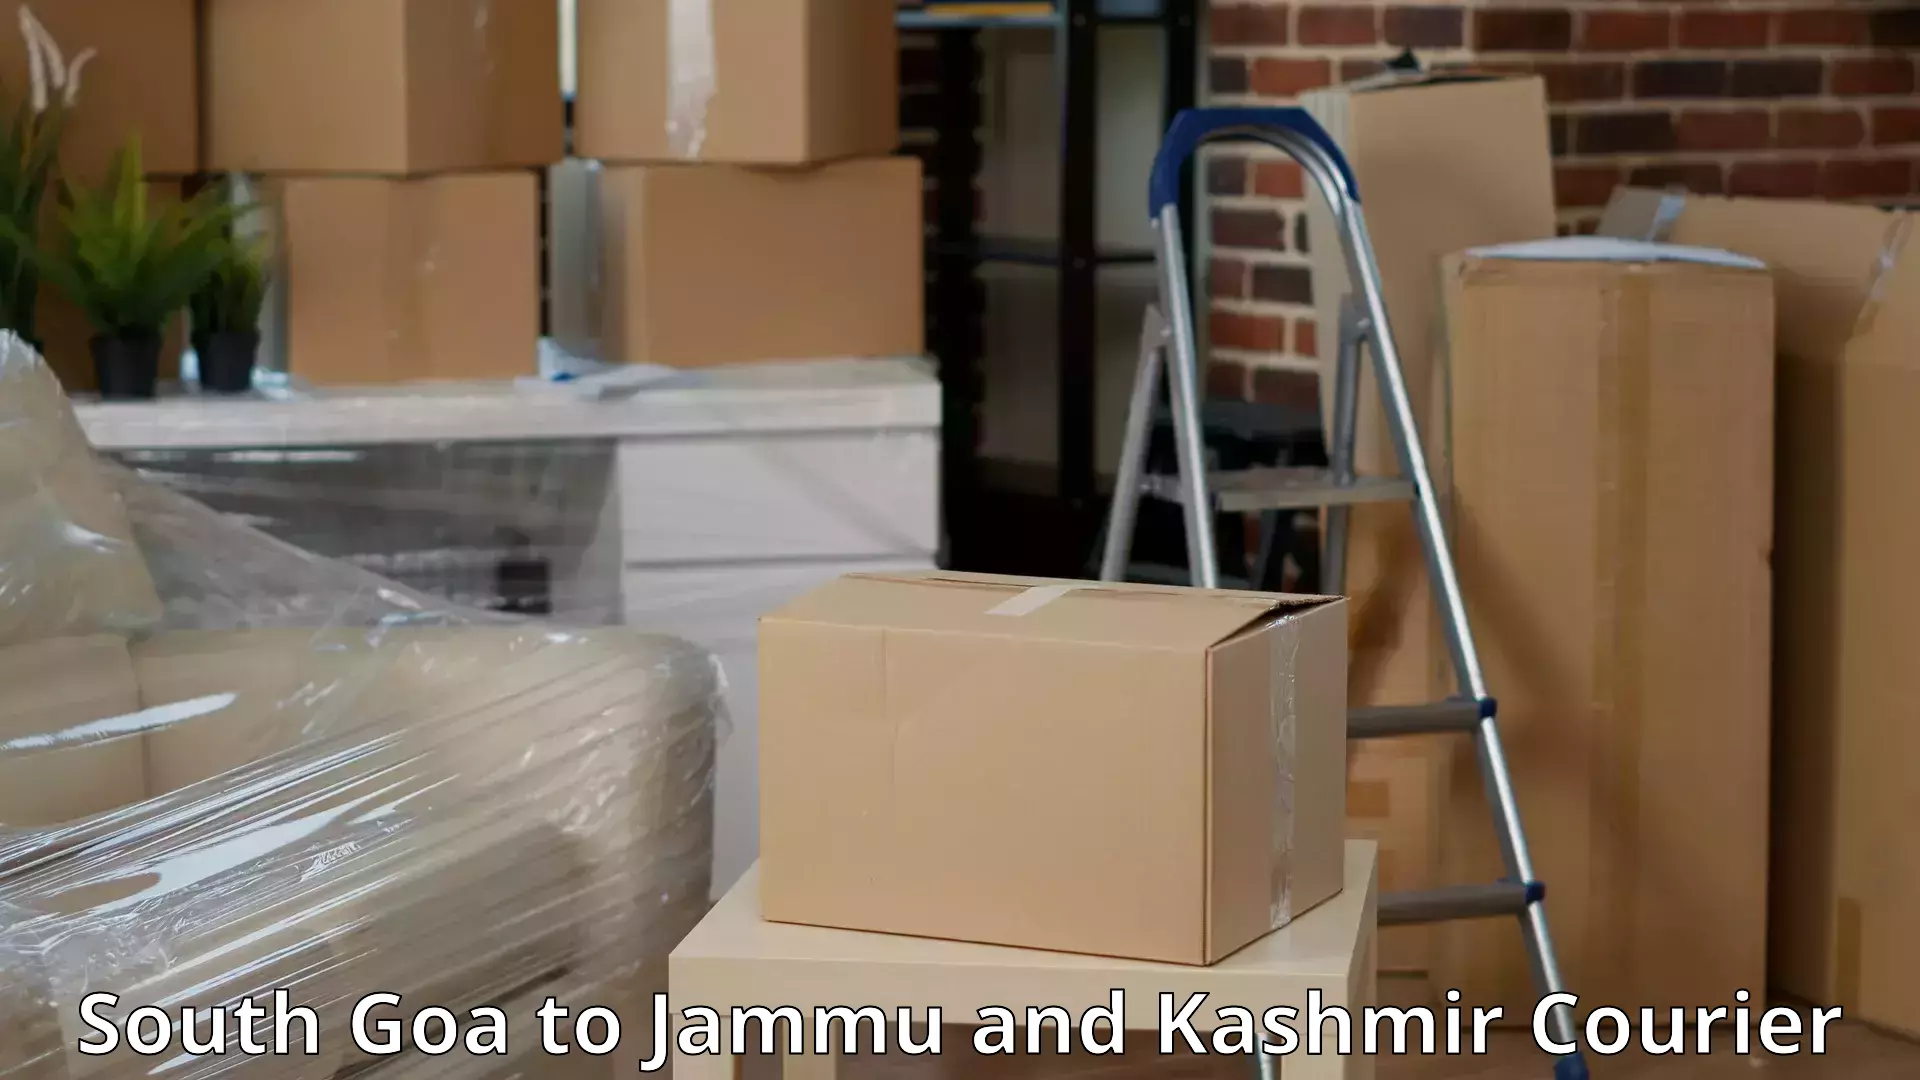 Furniture relocation experts South Goa to Jammu and Kashmir